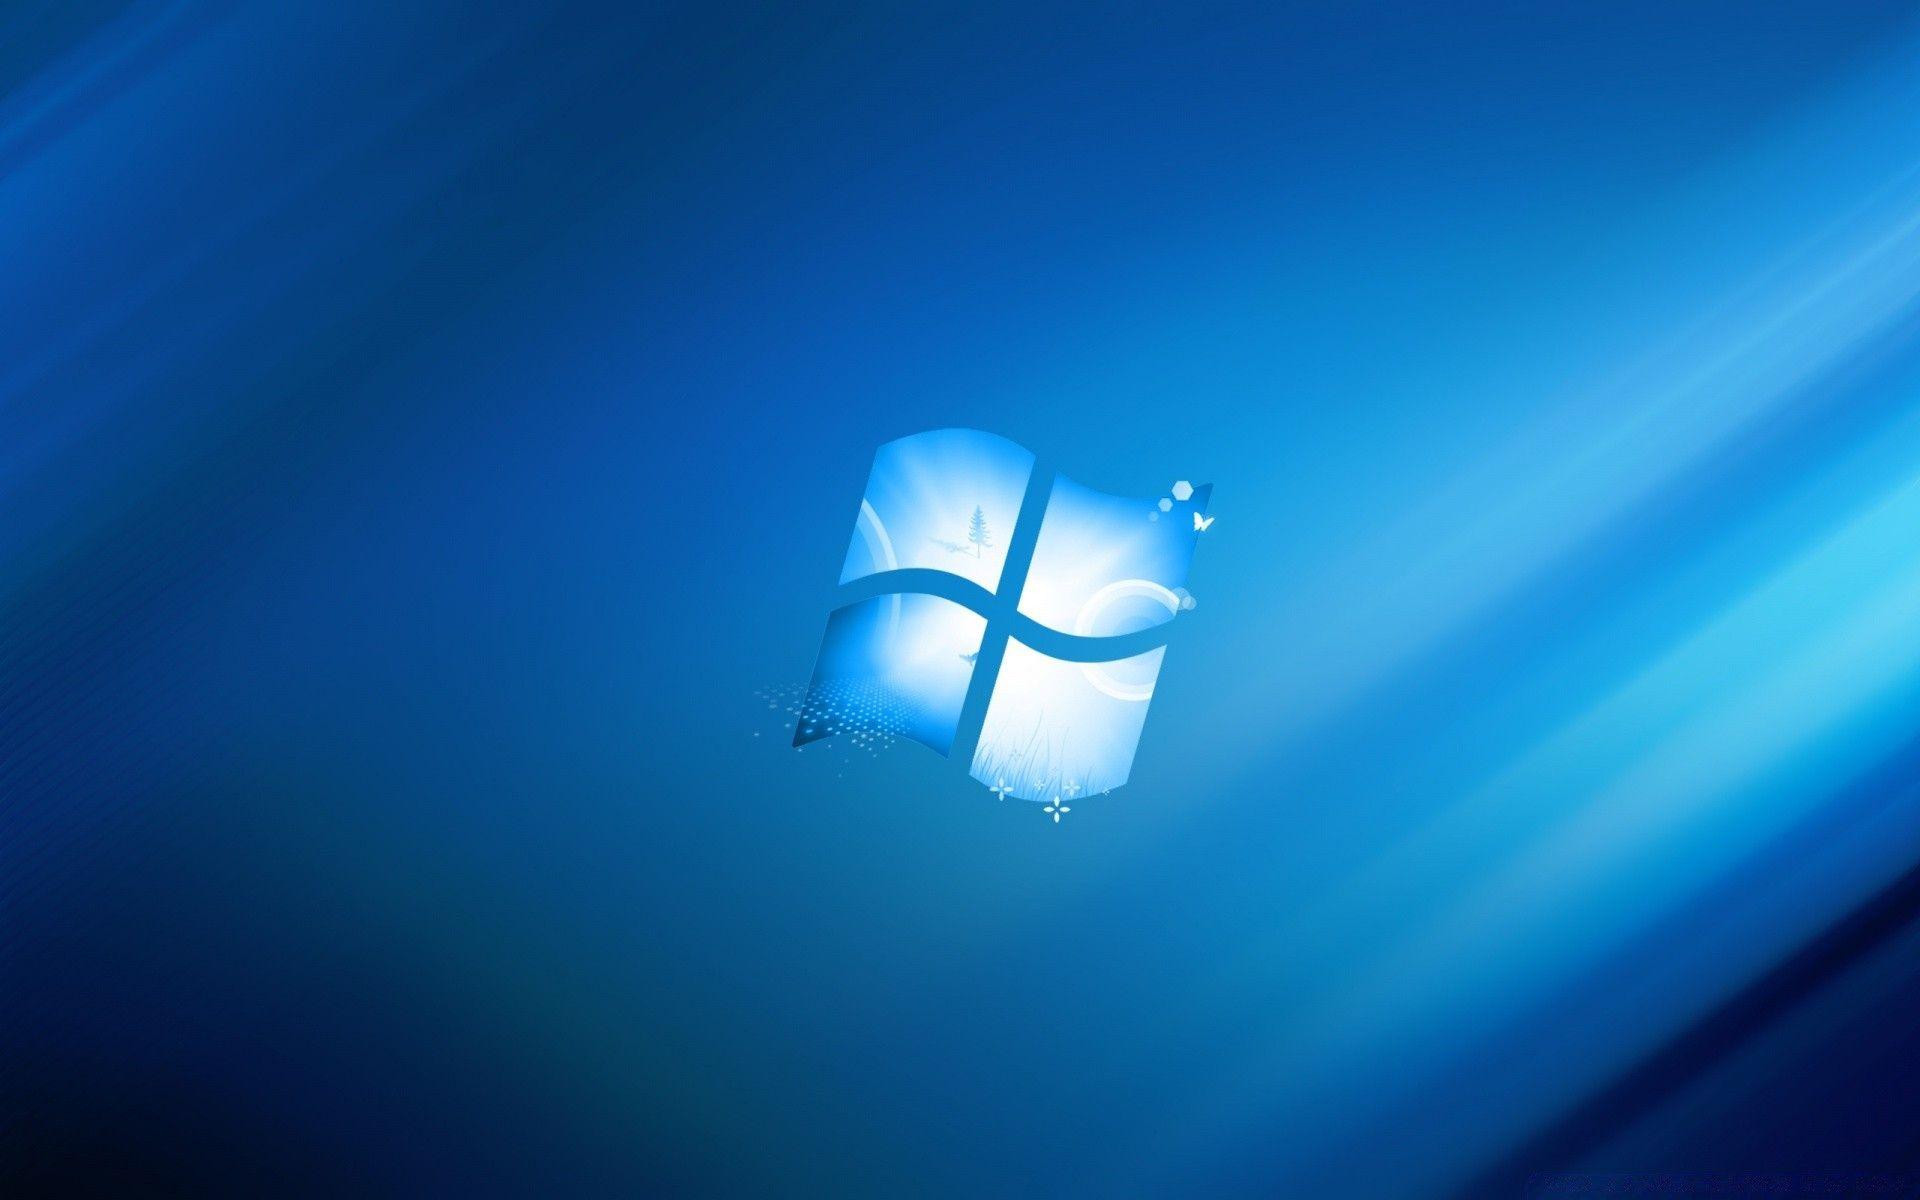 Windows 8 Background I. Android wallpaper for free